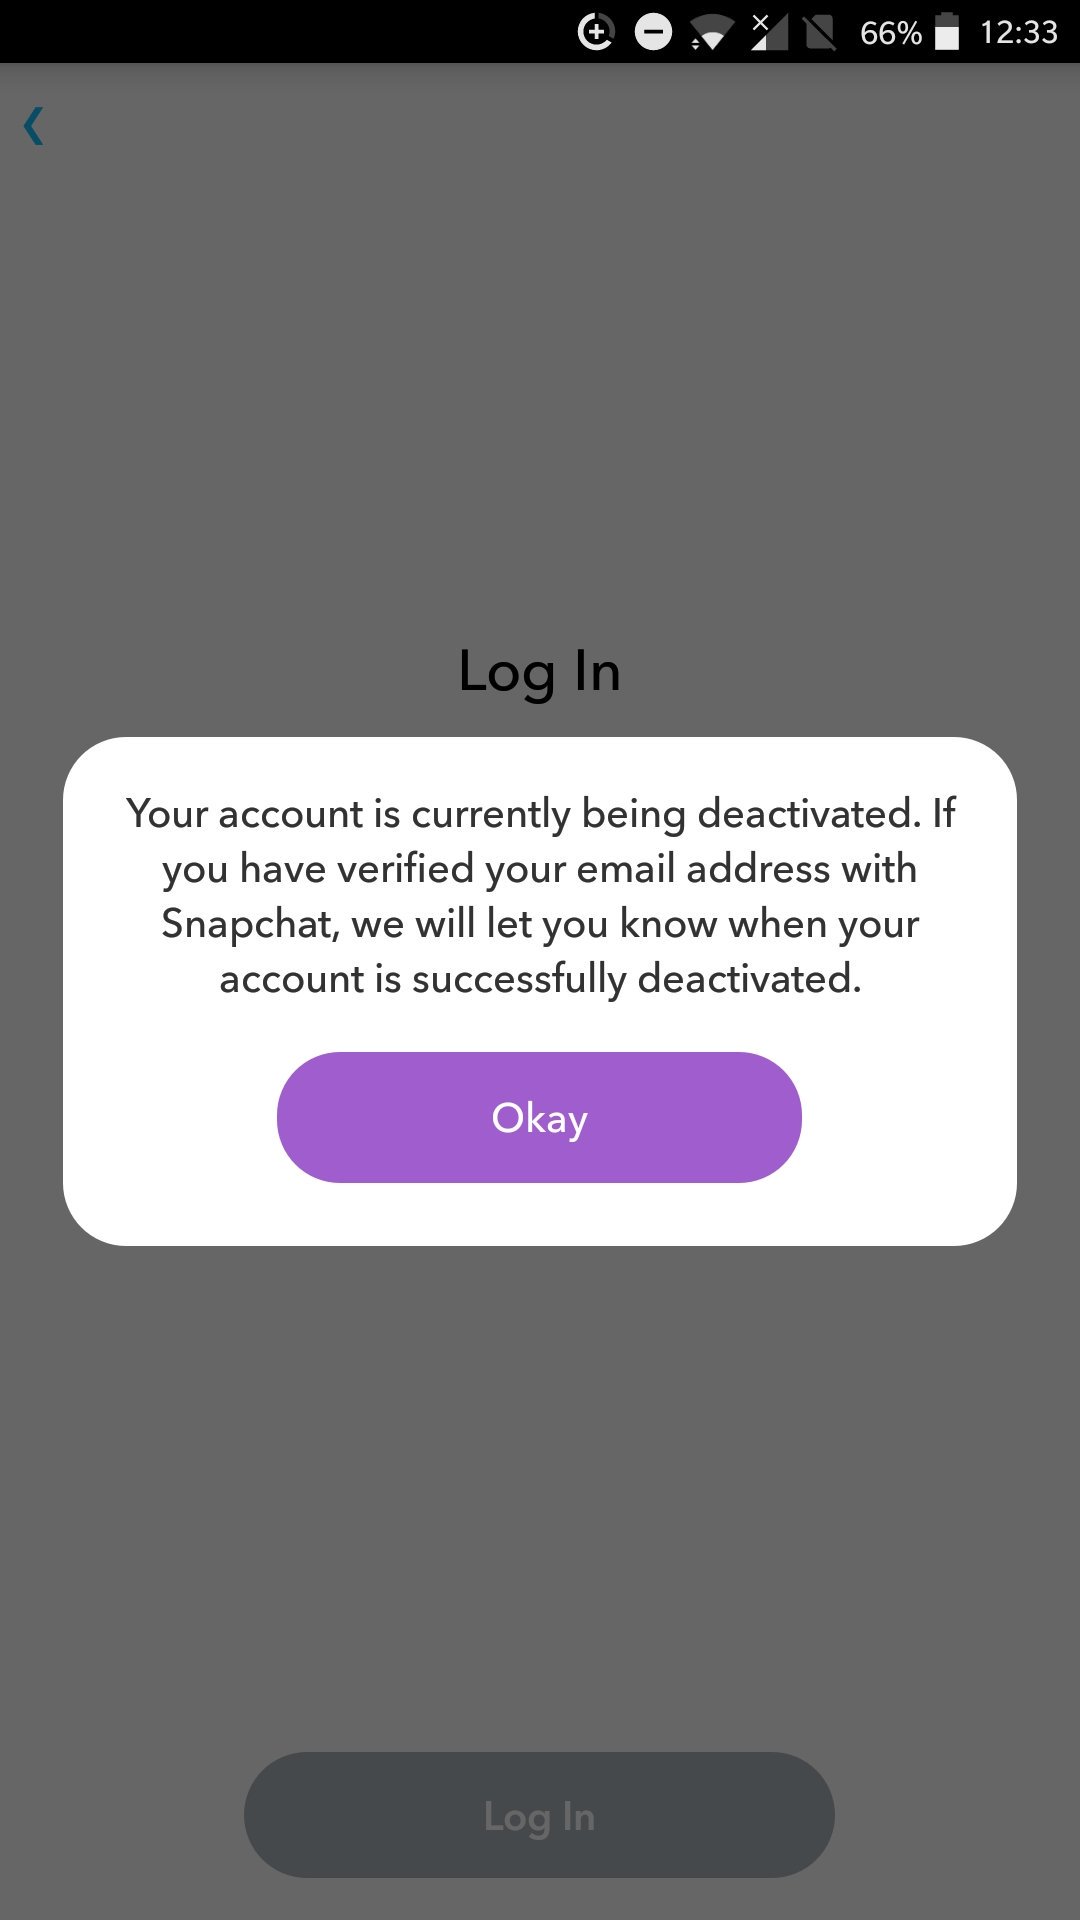 Snapchat Support auf Twitter: "@e21hunter21 After deactivating your